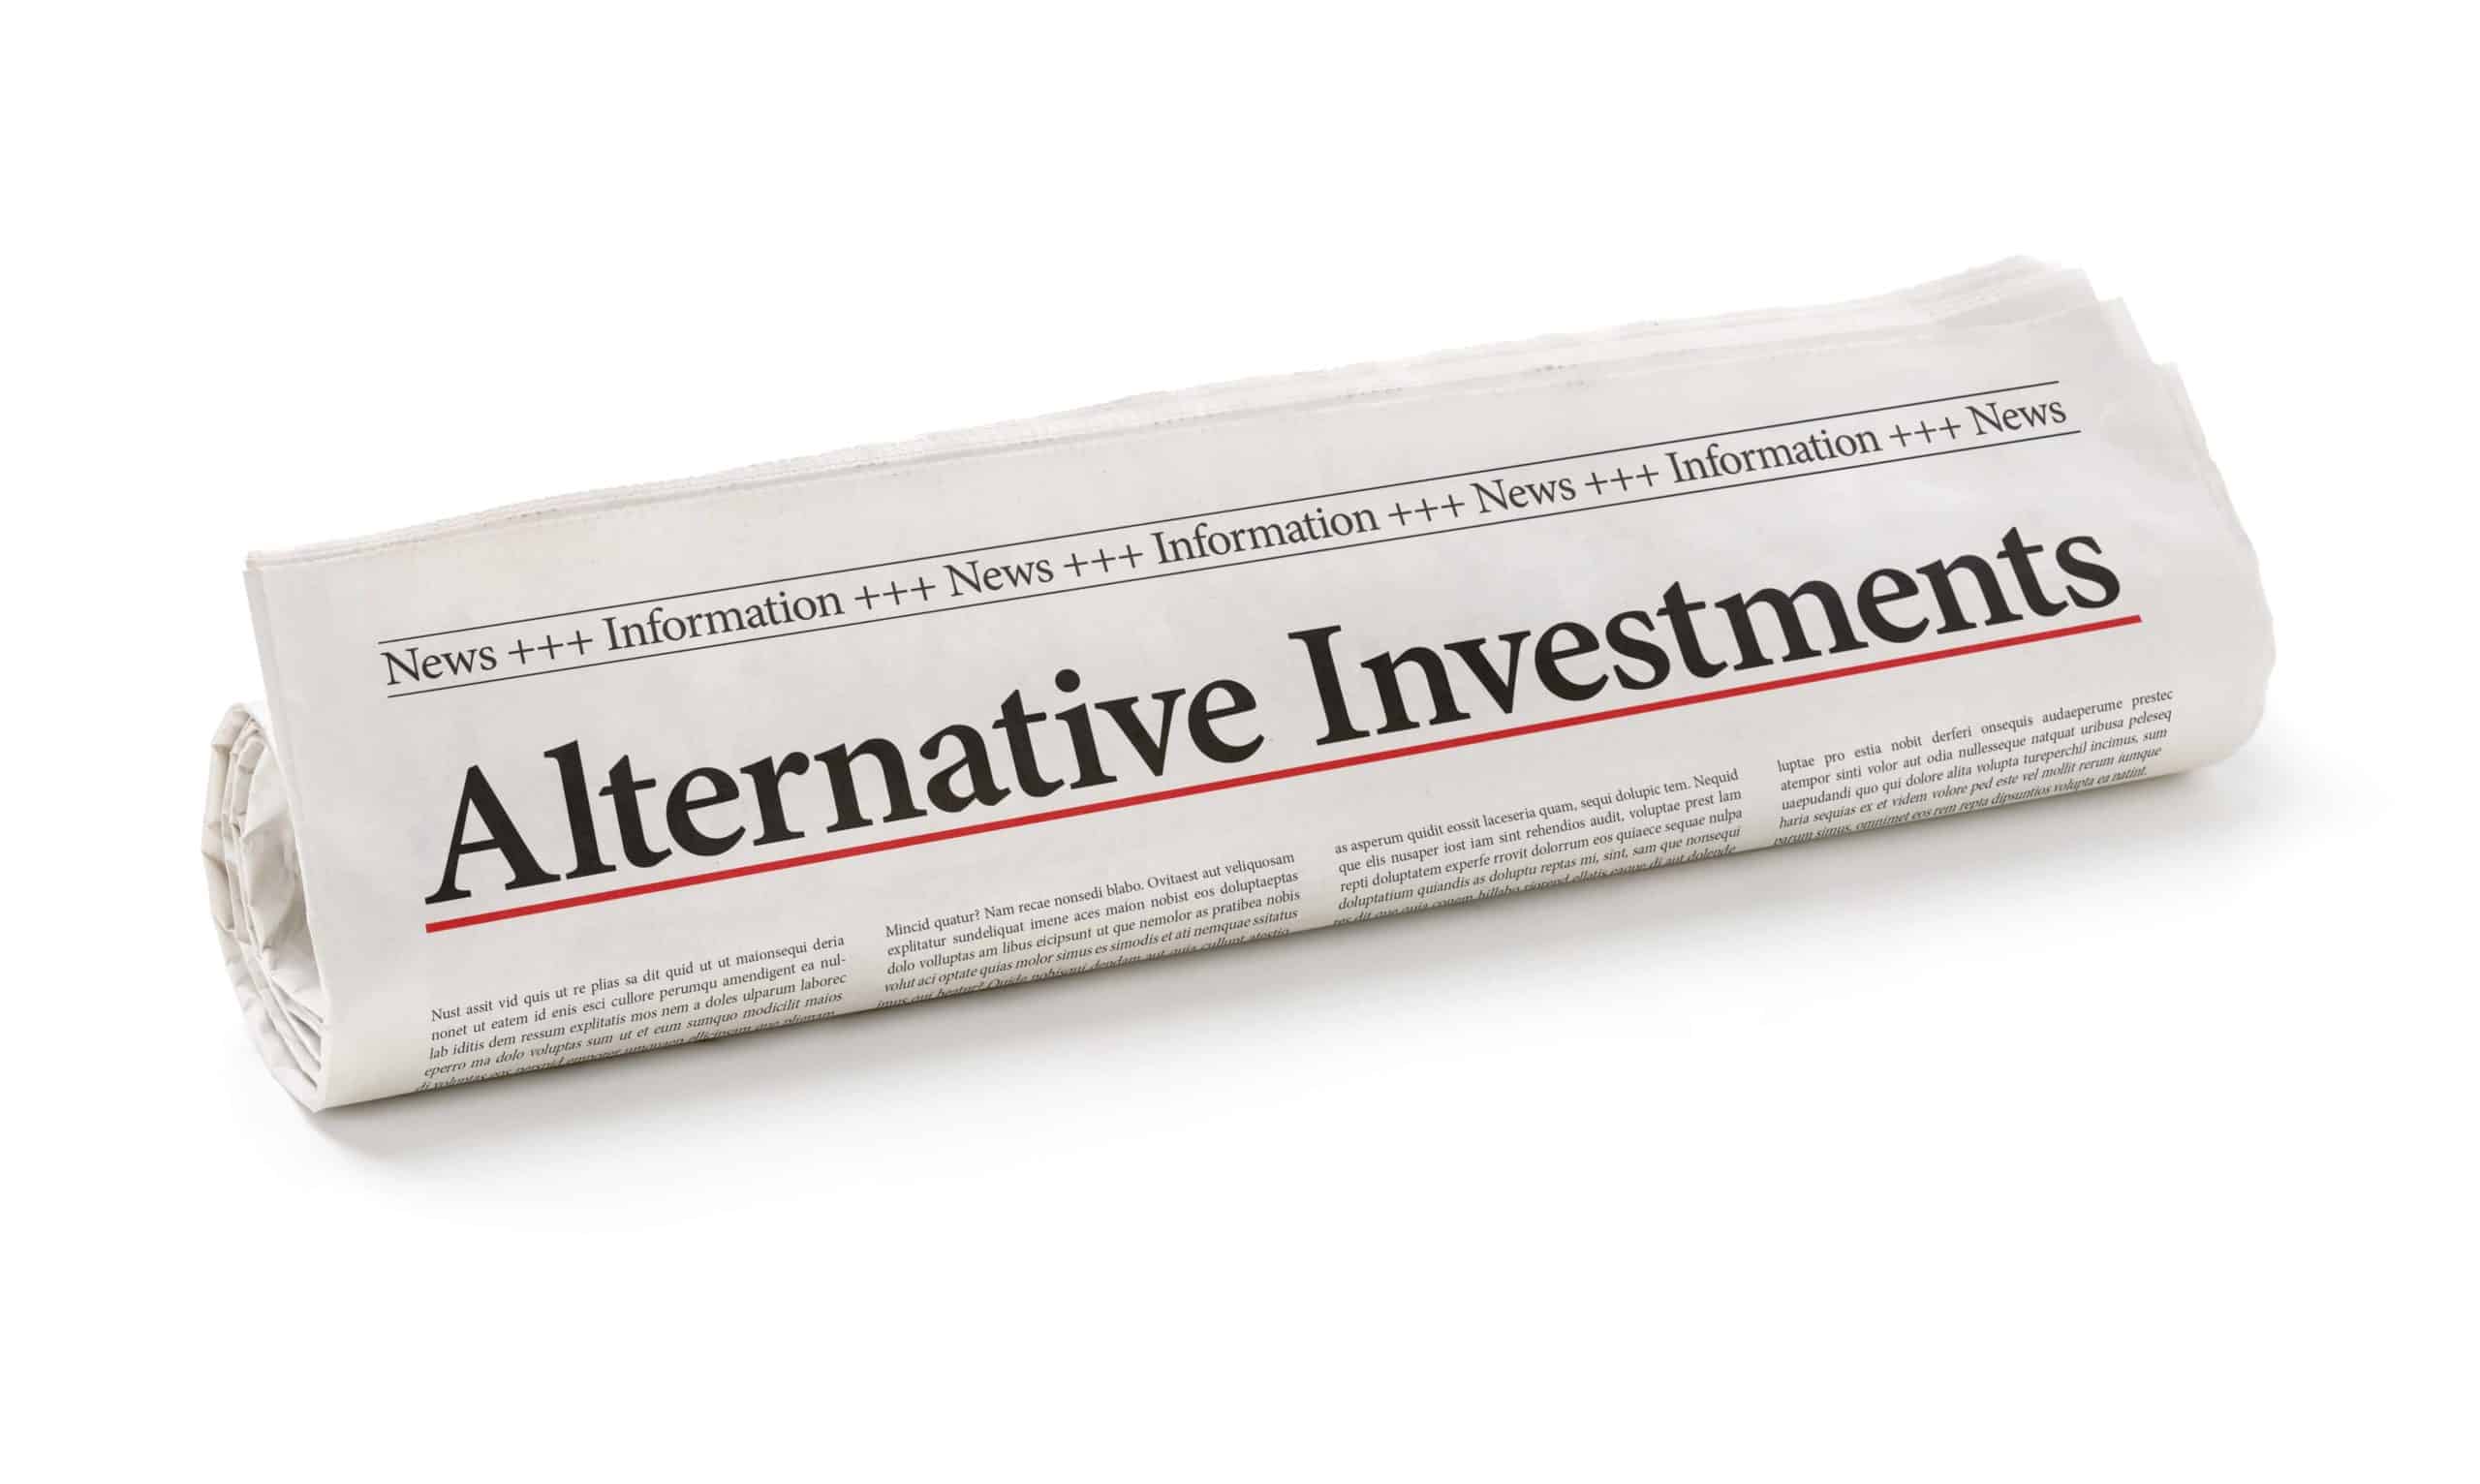 Are Alternative Investments The Key to Diversification?